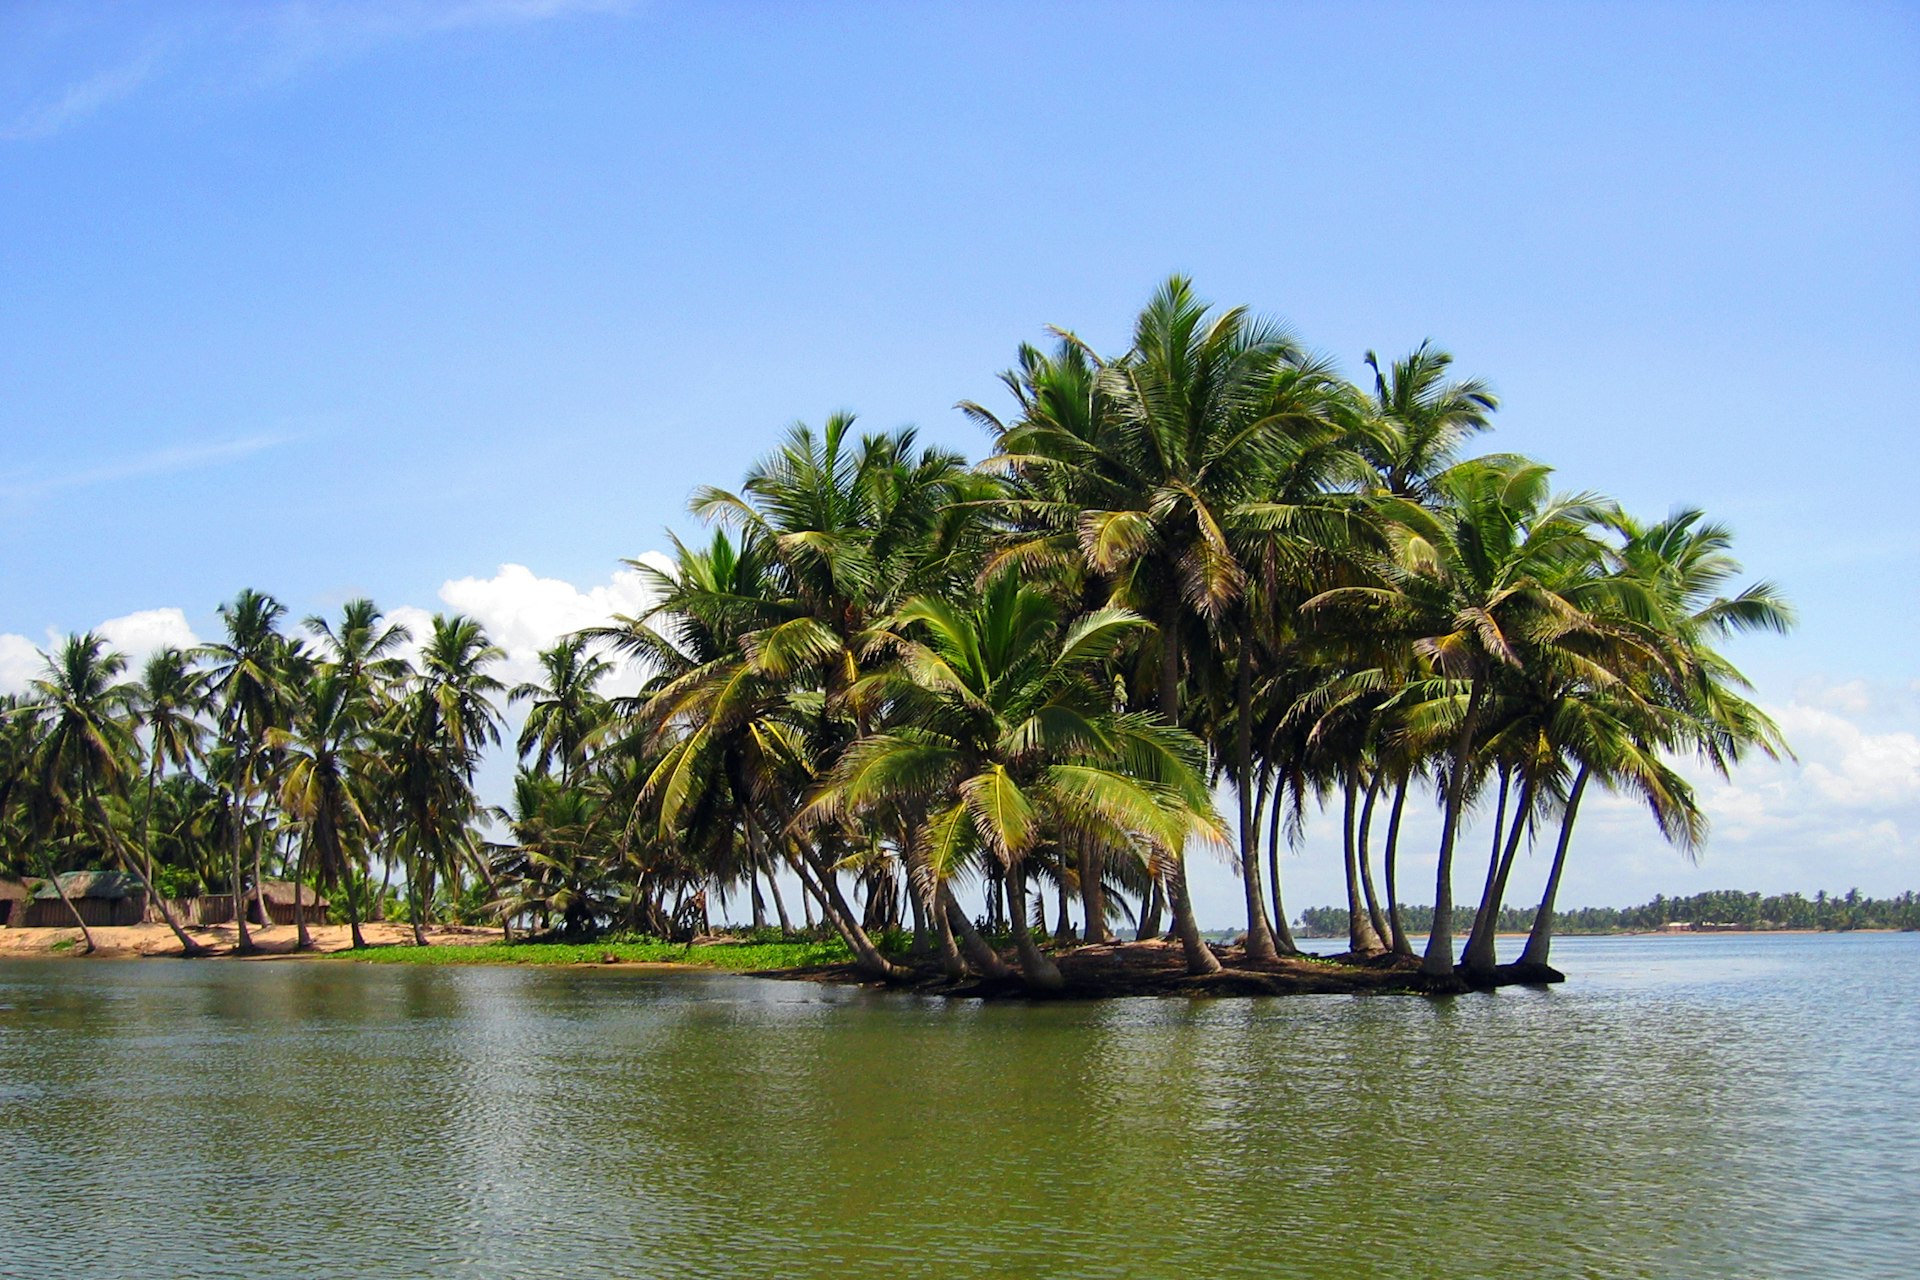 Blue sky and palm trees by a lagoon just where the River Volta meets the sea, the Atlantic Ocean and the Gulf of Guinea